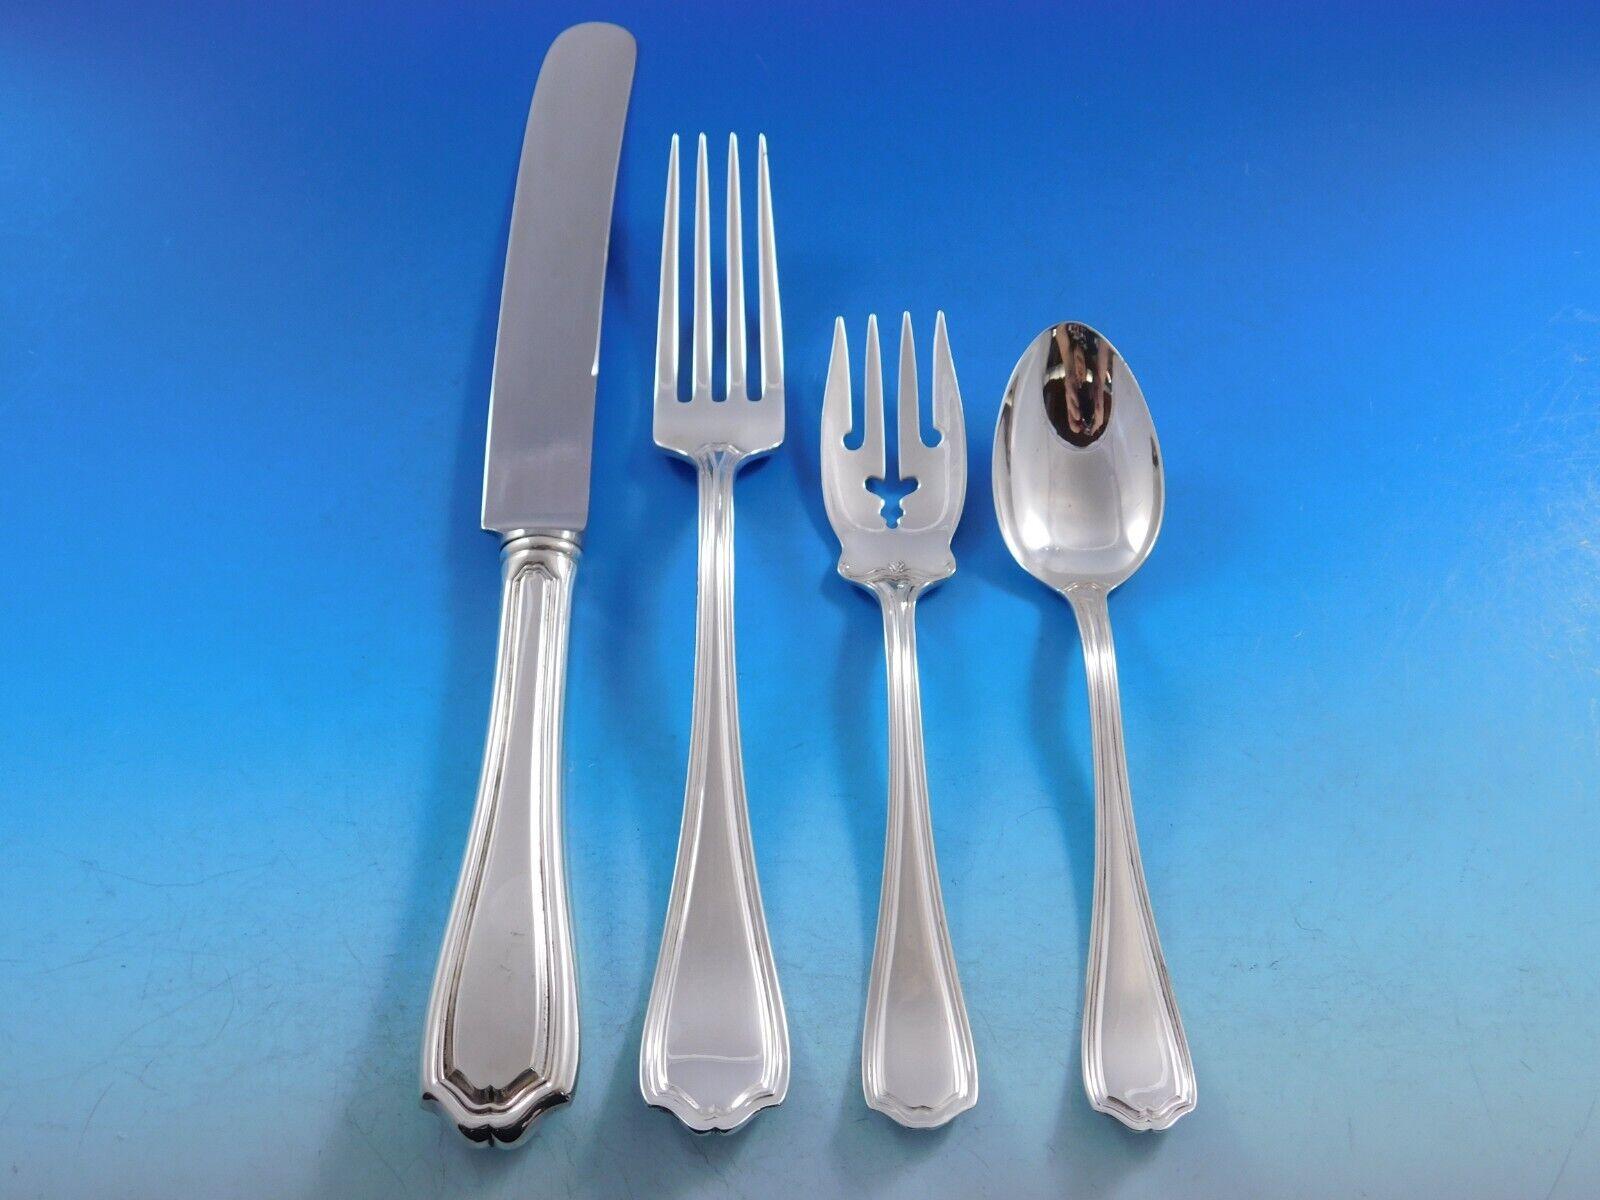 Dinner Size Hepplewhite by Reed & Barton sterling silver Flatware set, 42 pieces. This tailored, timeless pattern is a best seller. This set includes:

8 Dinner Size Knives, 10